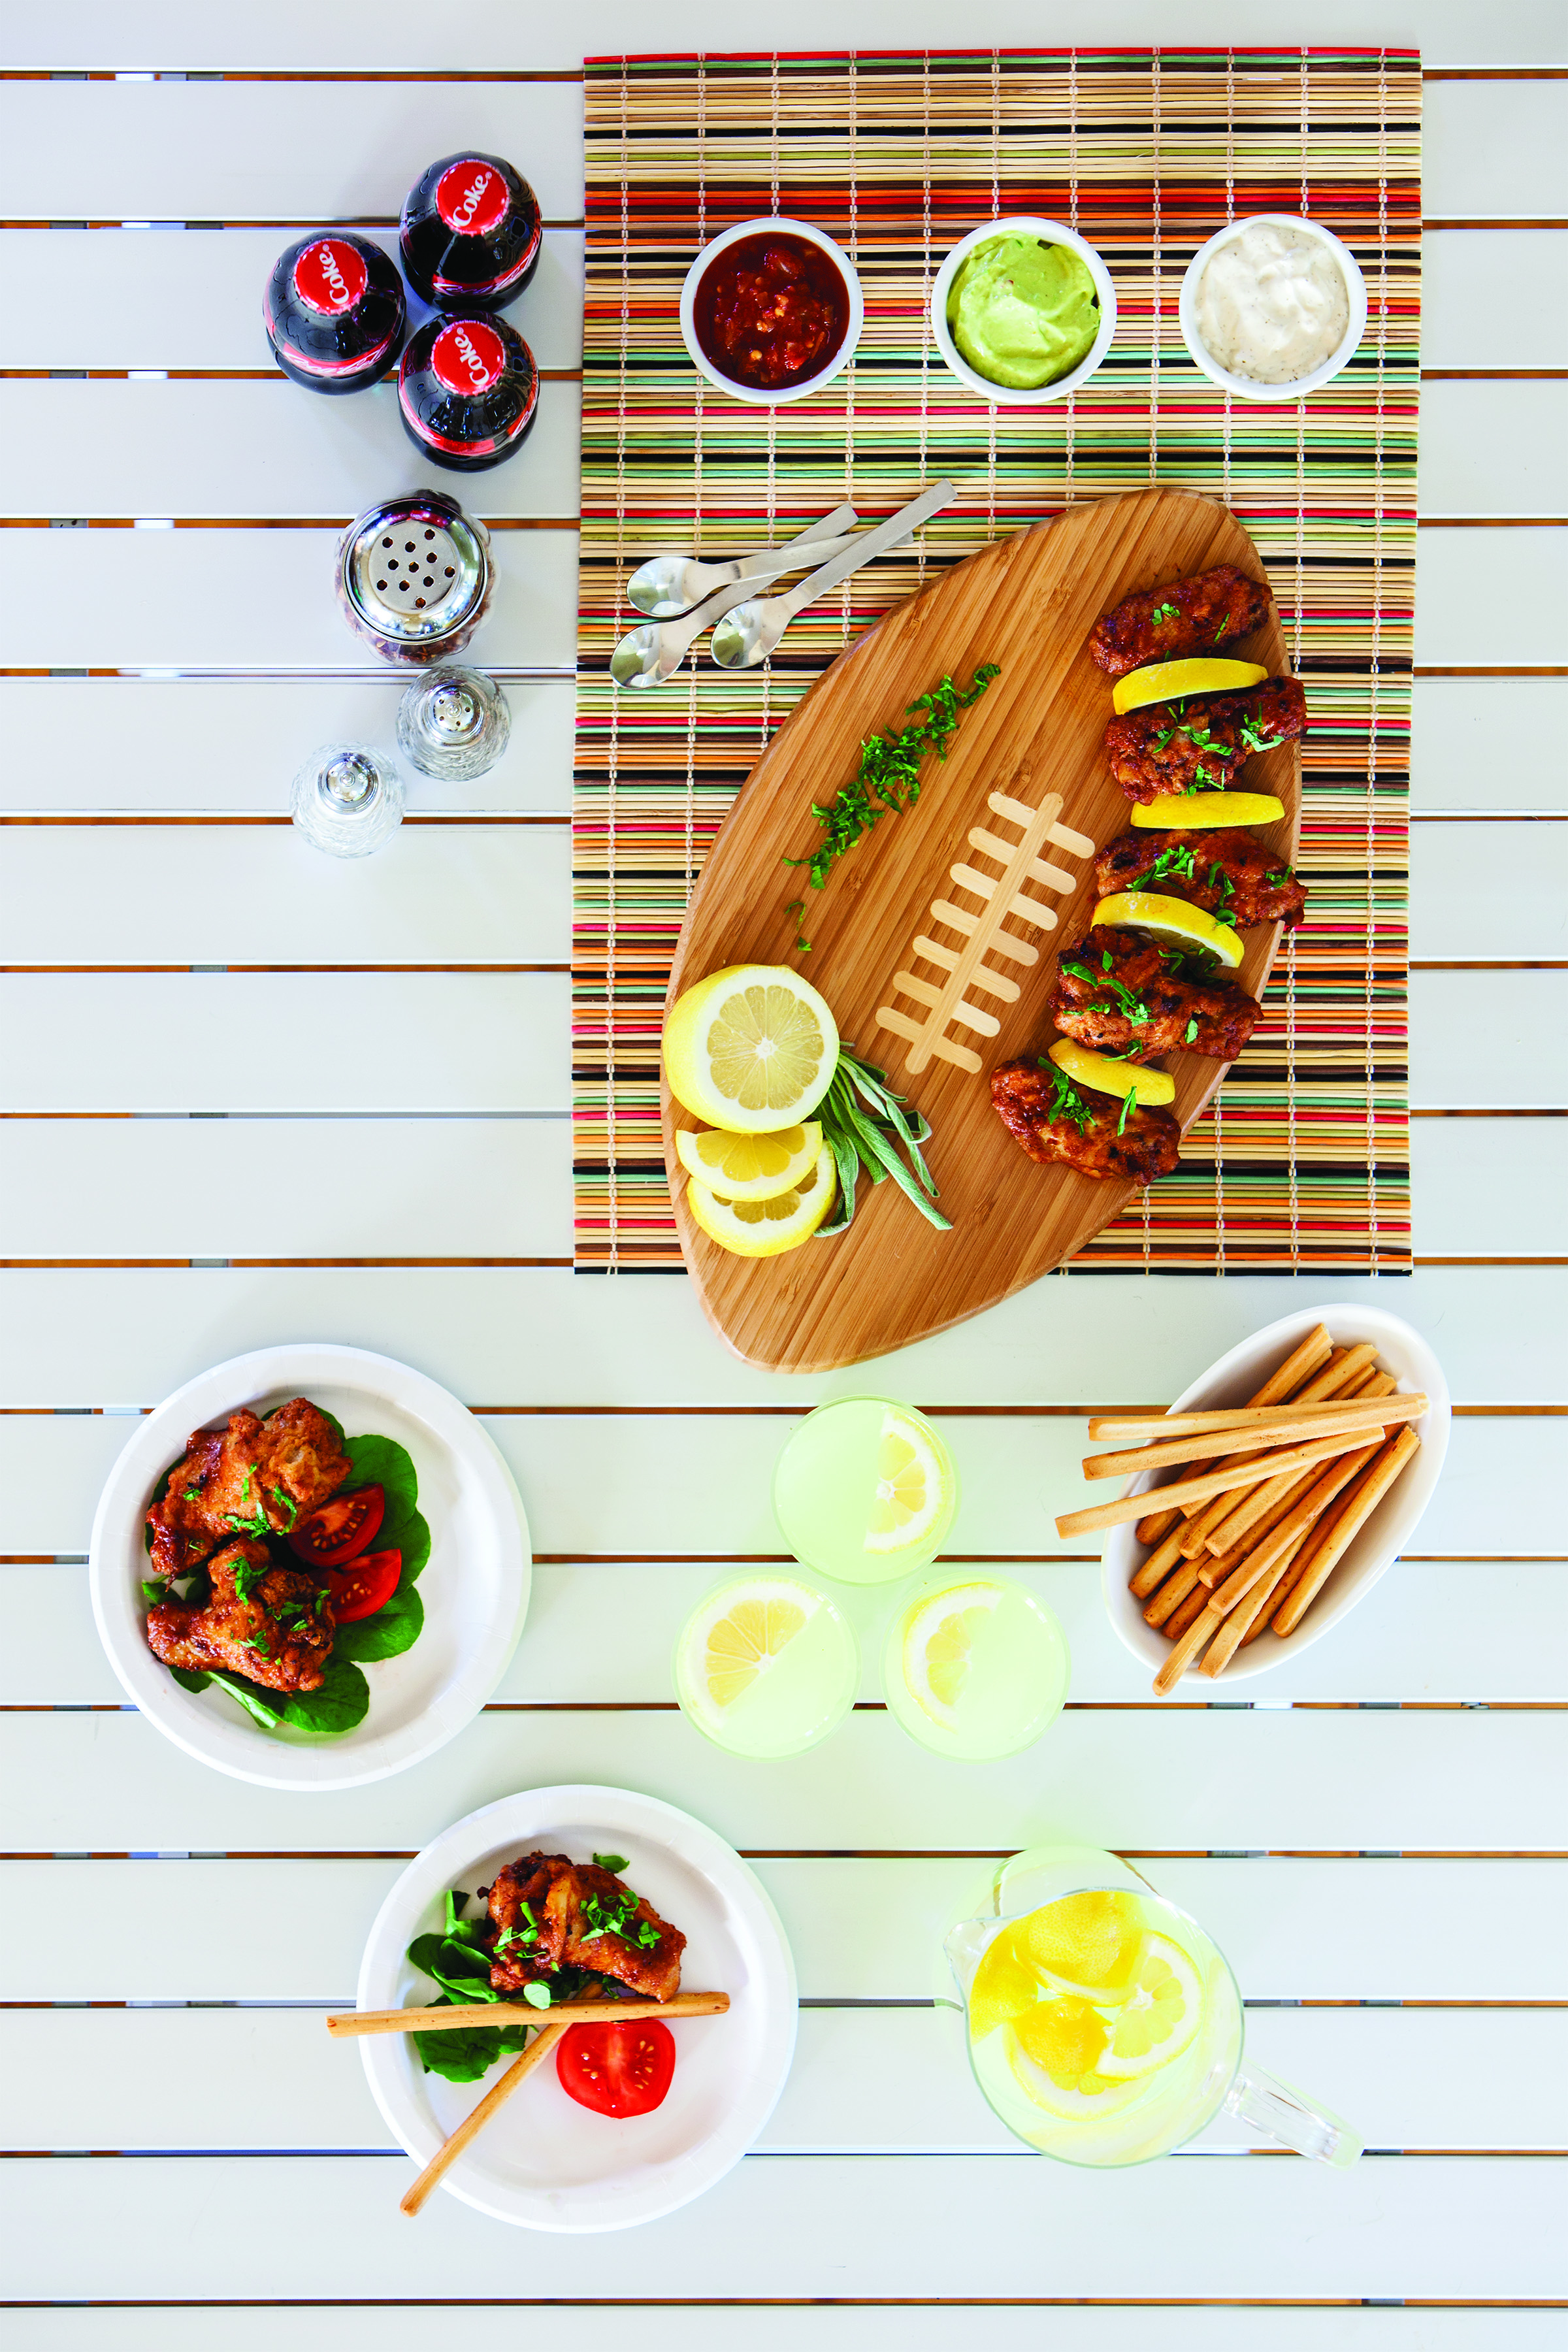 NFL 100 - Touchdown! Pro Football Cutting Board & Serving Tray